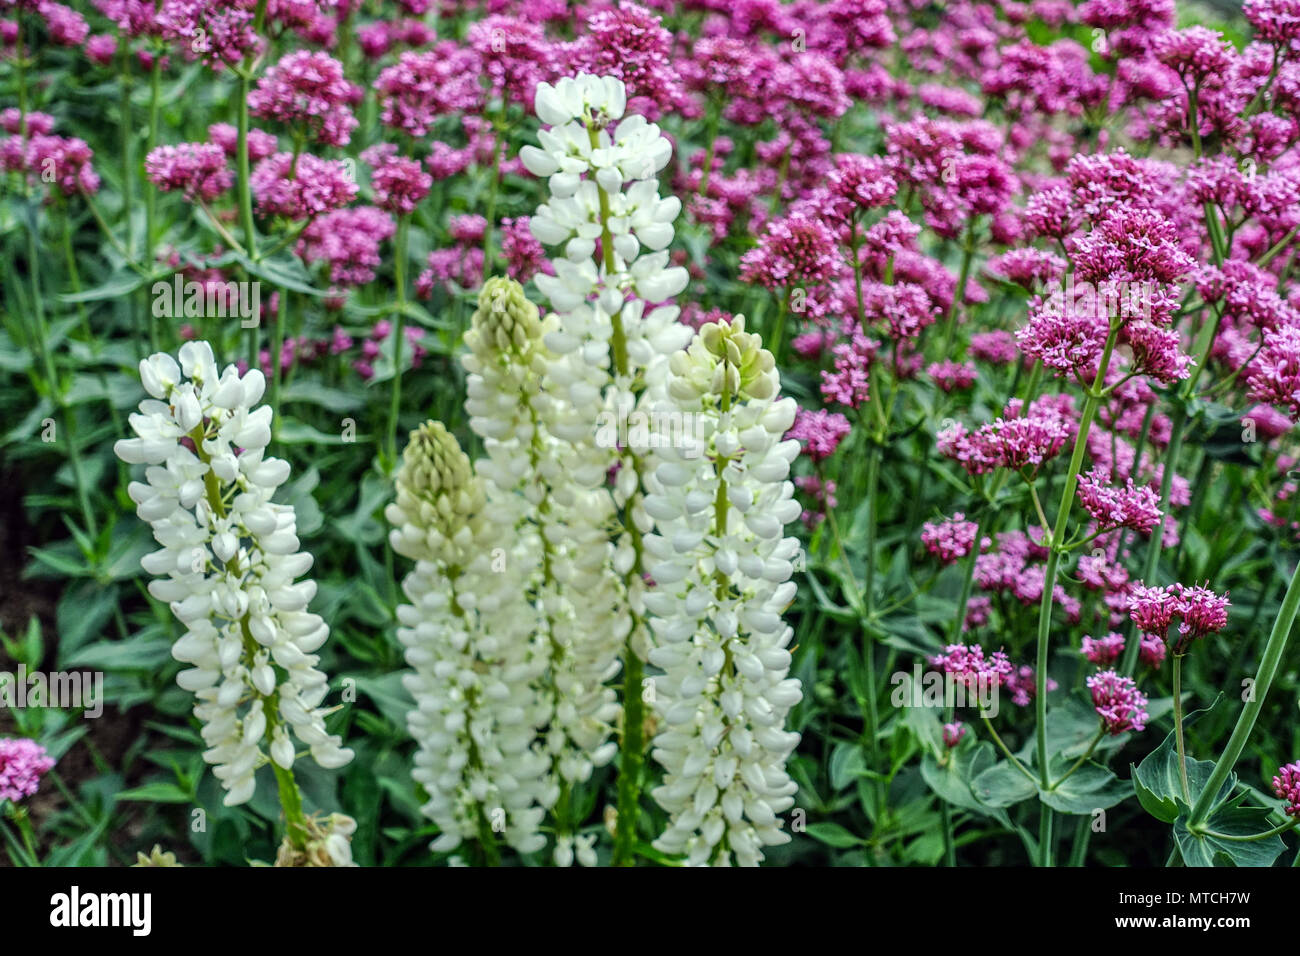 Garden White Lupine White Lupinus polyphyllus Pink Red valerian Centranthus ruber May Flowers Flowering Flowerbed Mixed Lupins Flower Lupinus Stock Photo